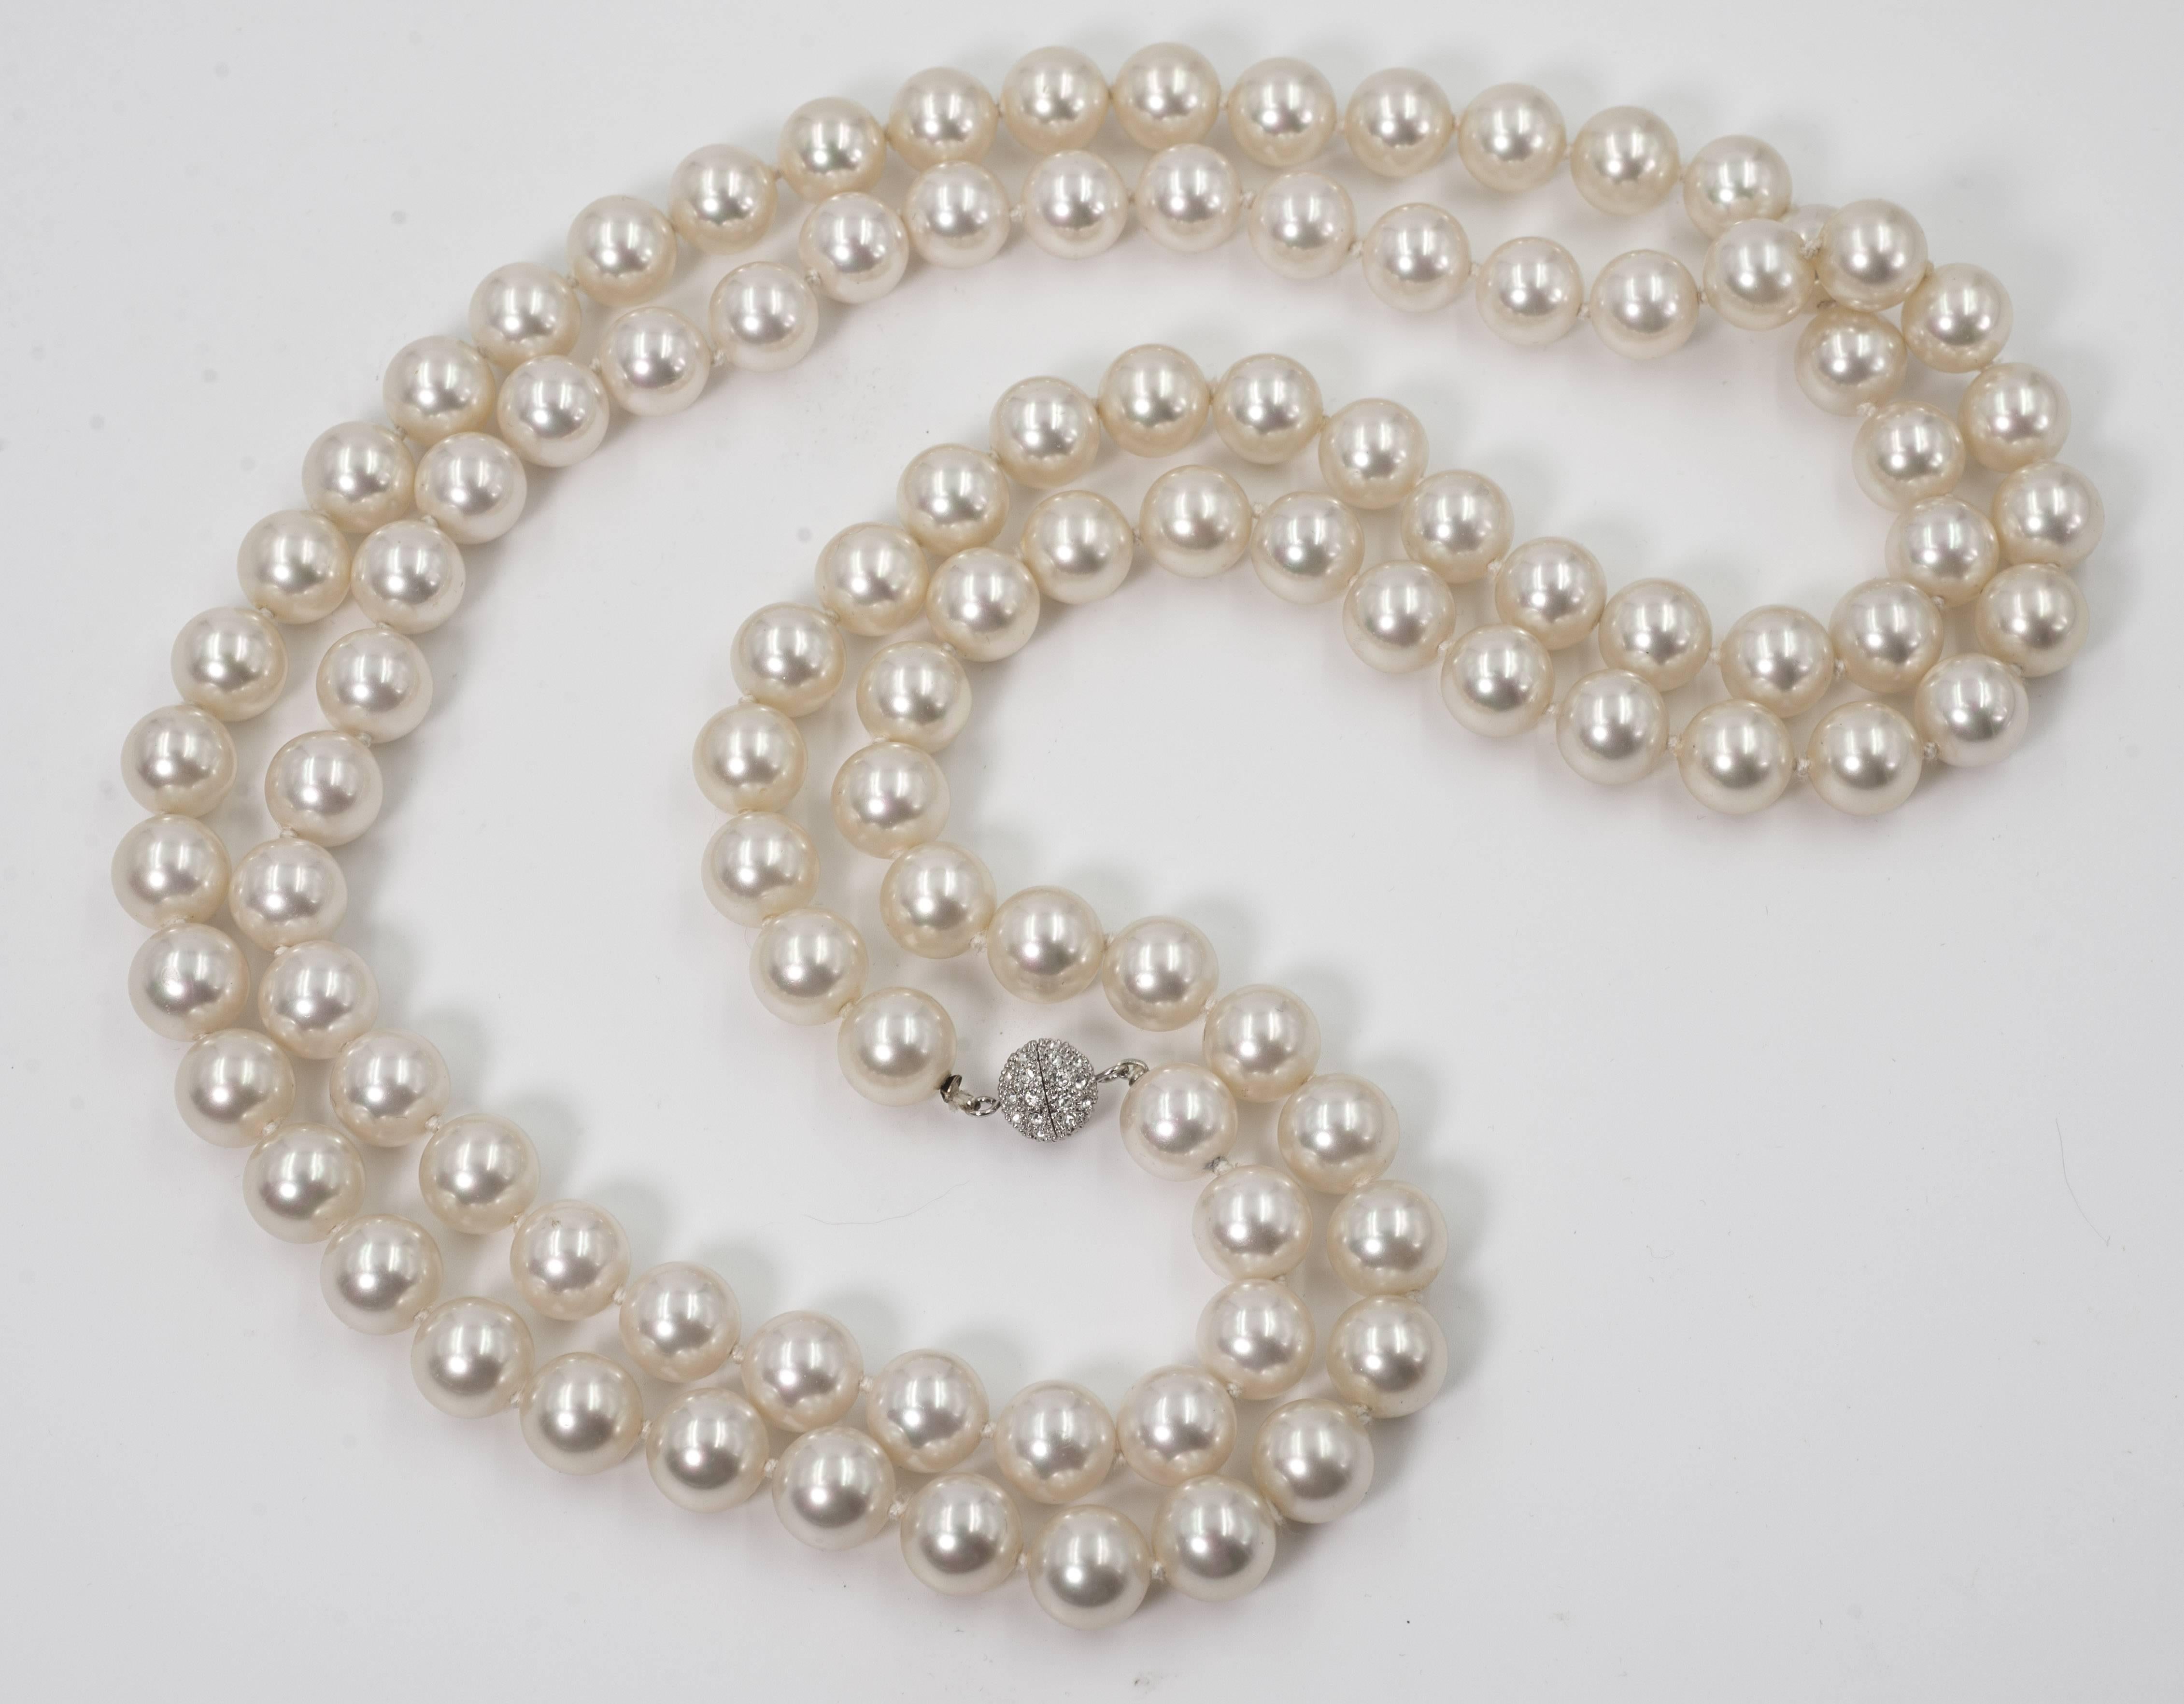 Bergdorf Goodman vintage 54 inch long finest wonderful classic creme faux hand made Japanese glass pearlized pearls no longer made. Pearls measure 12mm attached to pave ball screw clasp. Can be wrapped around as shown two or three times.